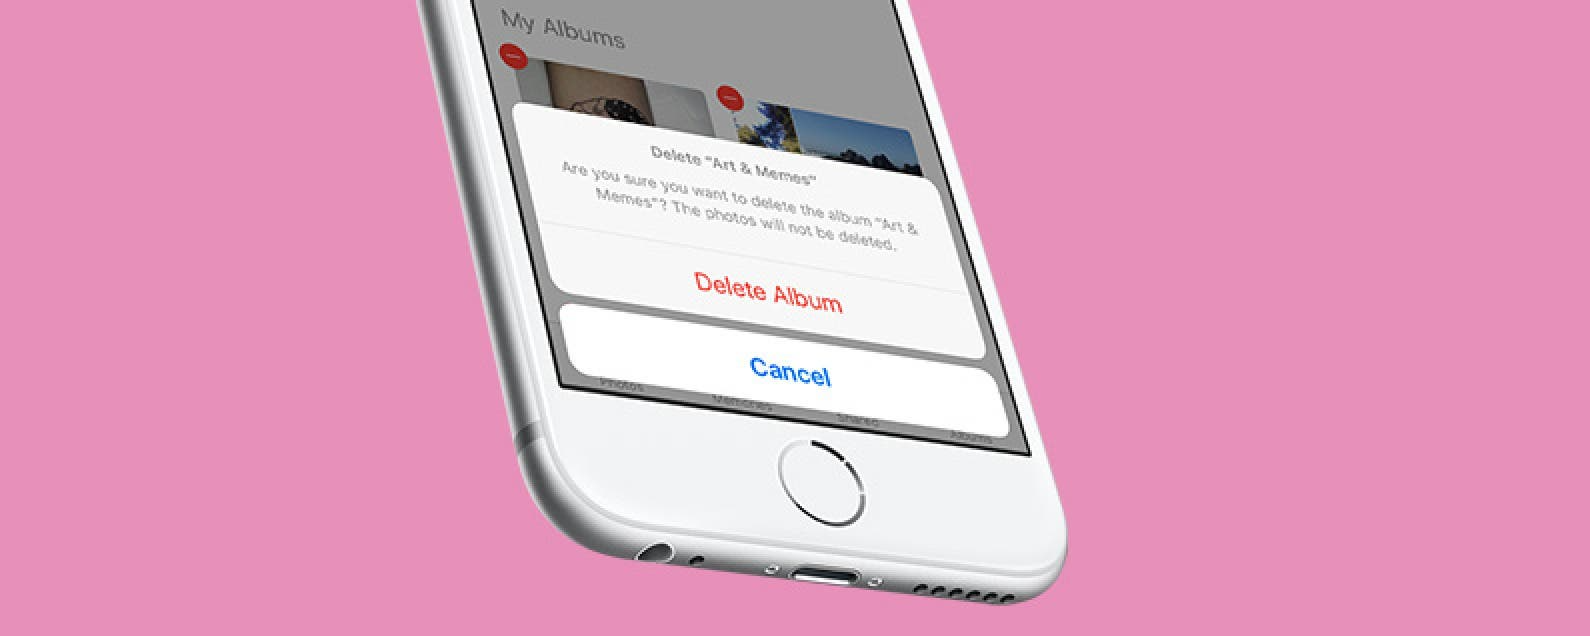 Delete Photos from iPhone